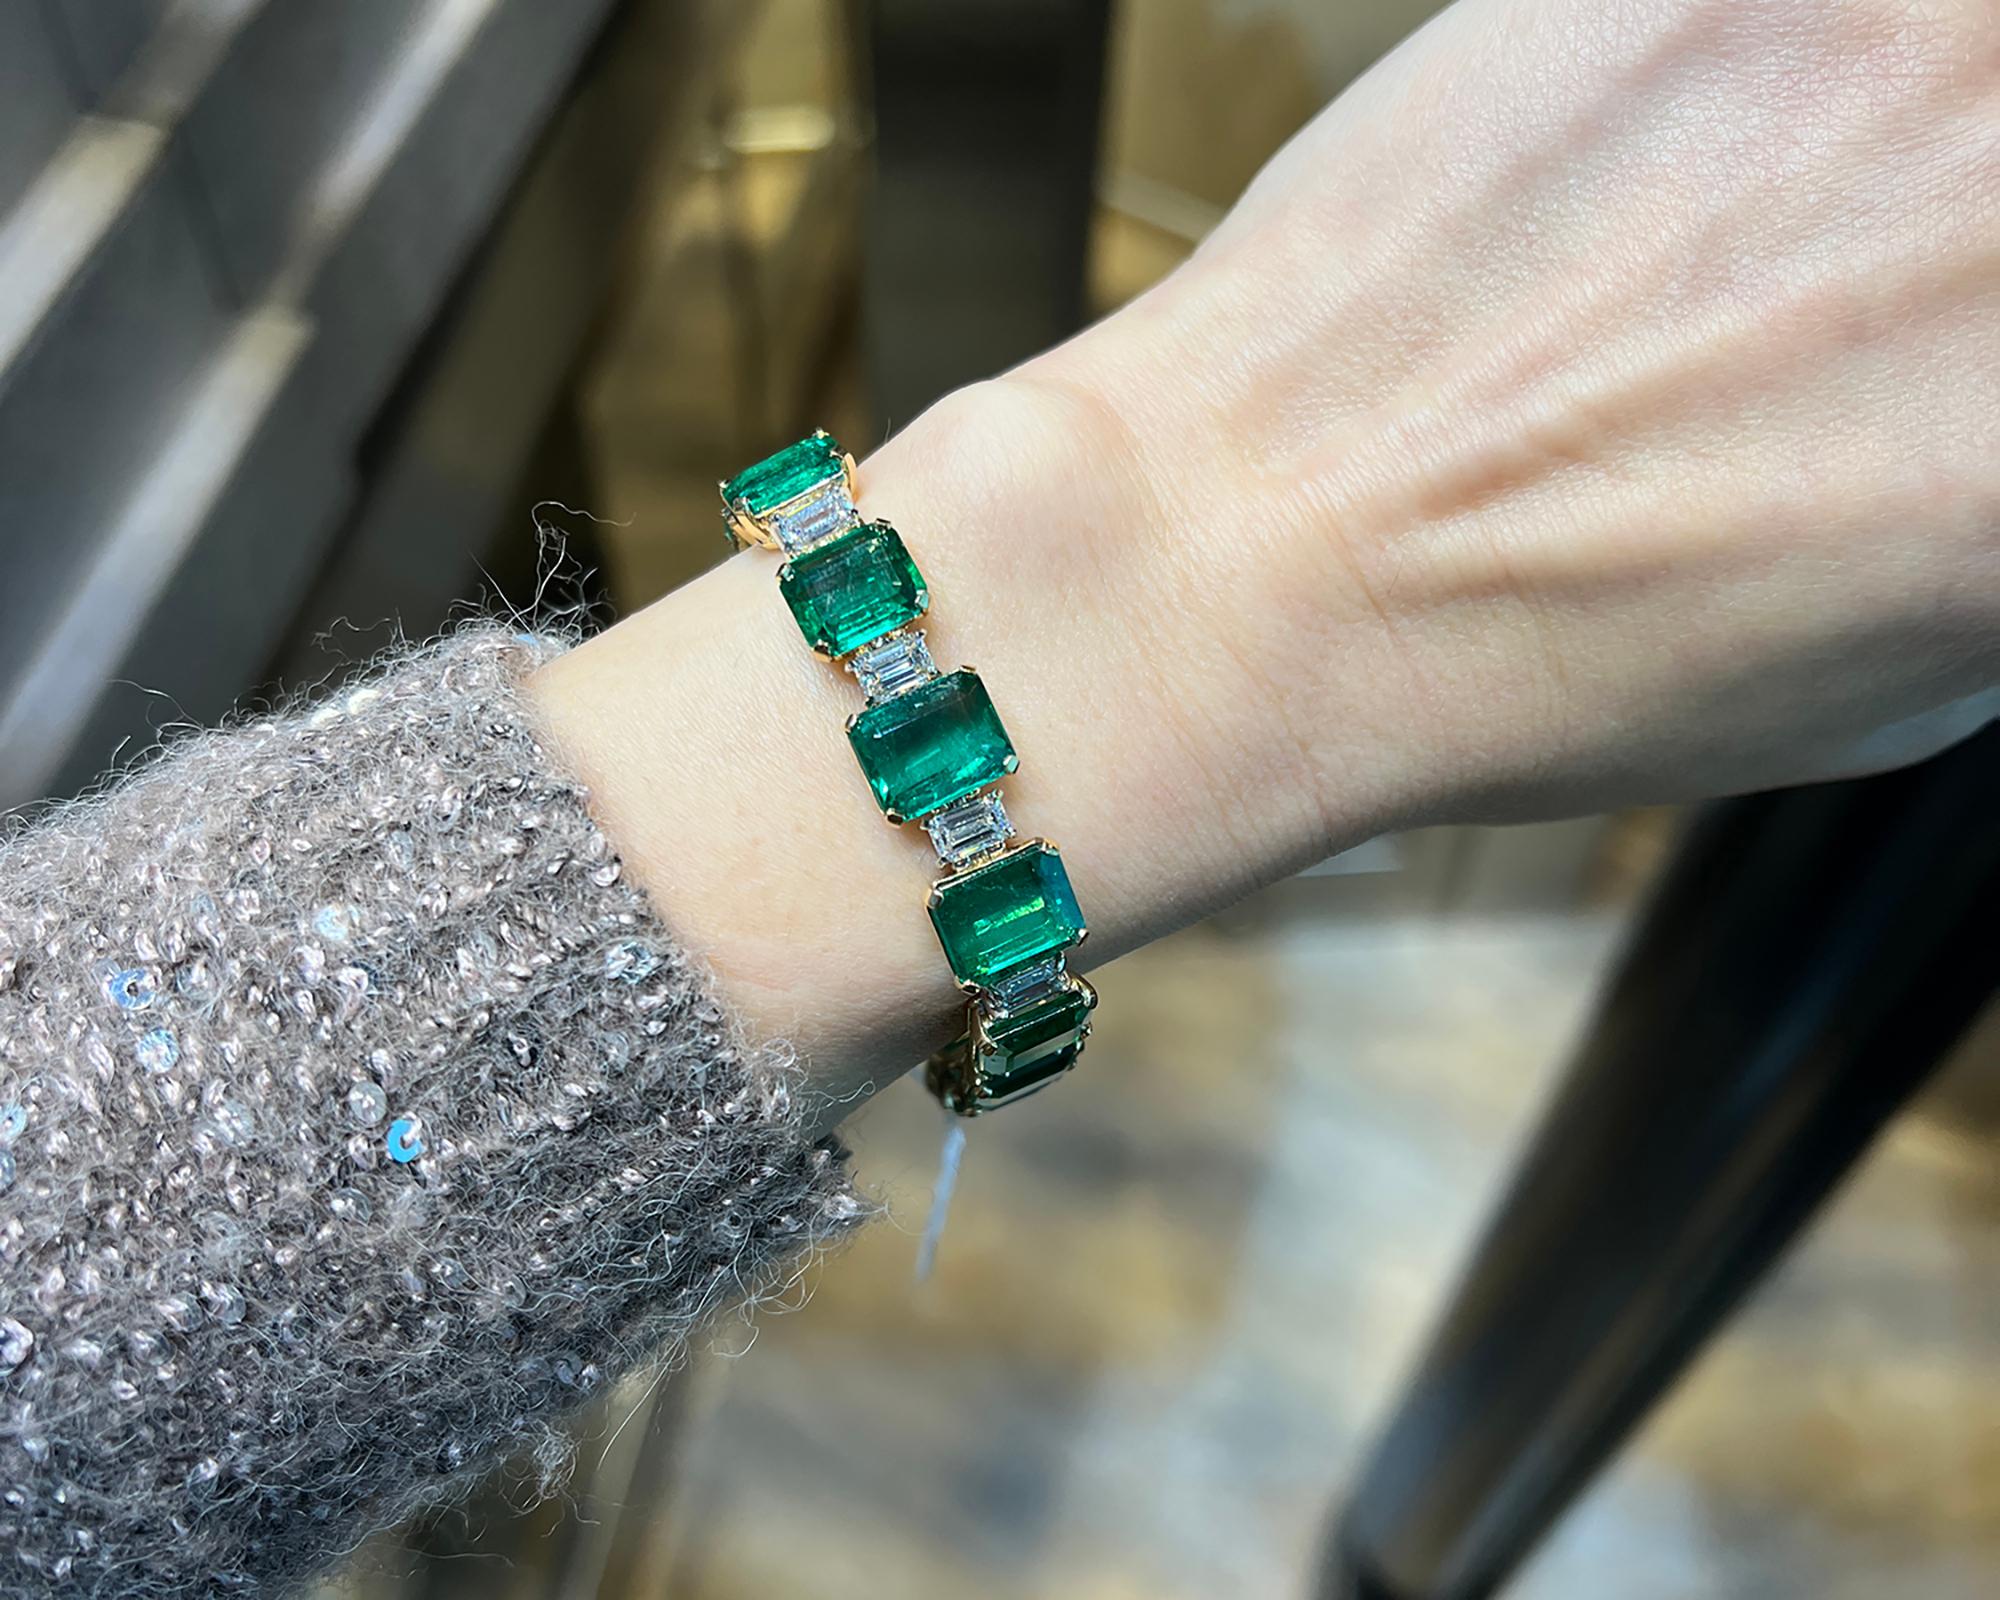 A bracelet set with 14 emerald-cut emeralds with the total weight of 40.63 carats, 2.90 carats each.
The emeralds are of Zambian origin, not certified.
14 emerald-cut diamonds weighing 7.30 carats (0.52 carats each). The diamonds are equivalent to